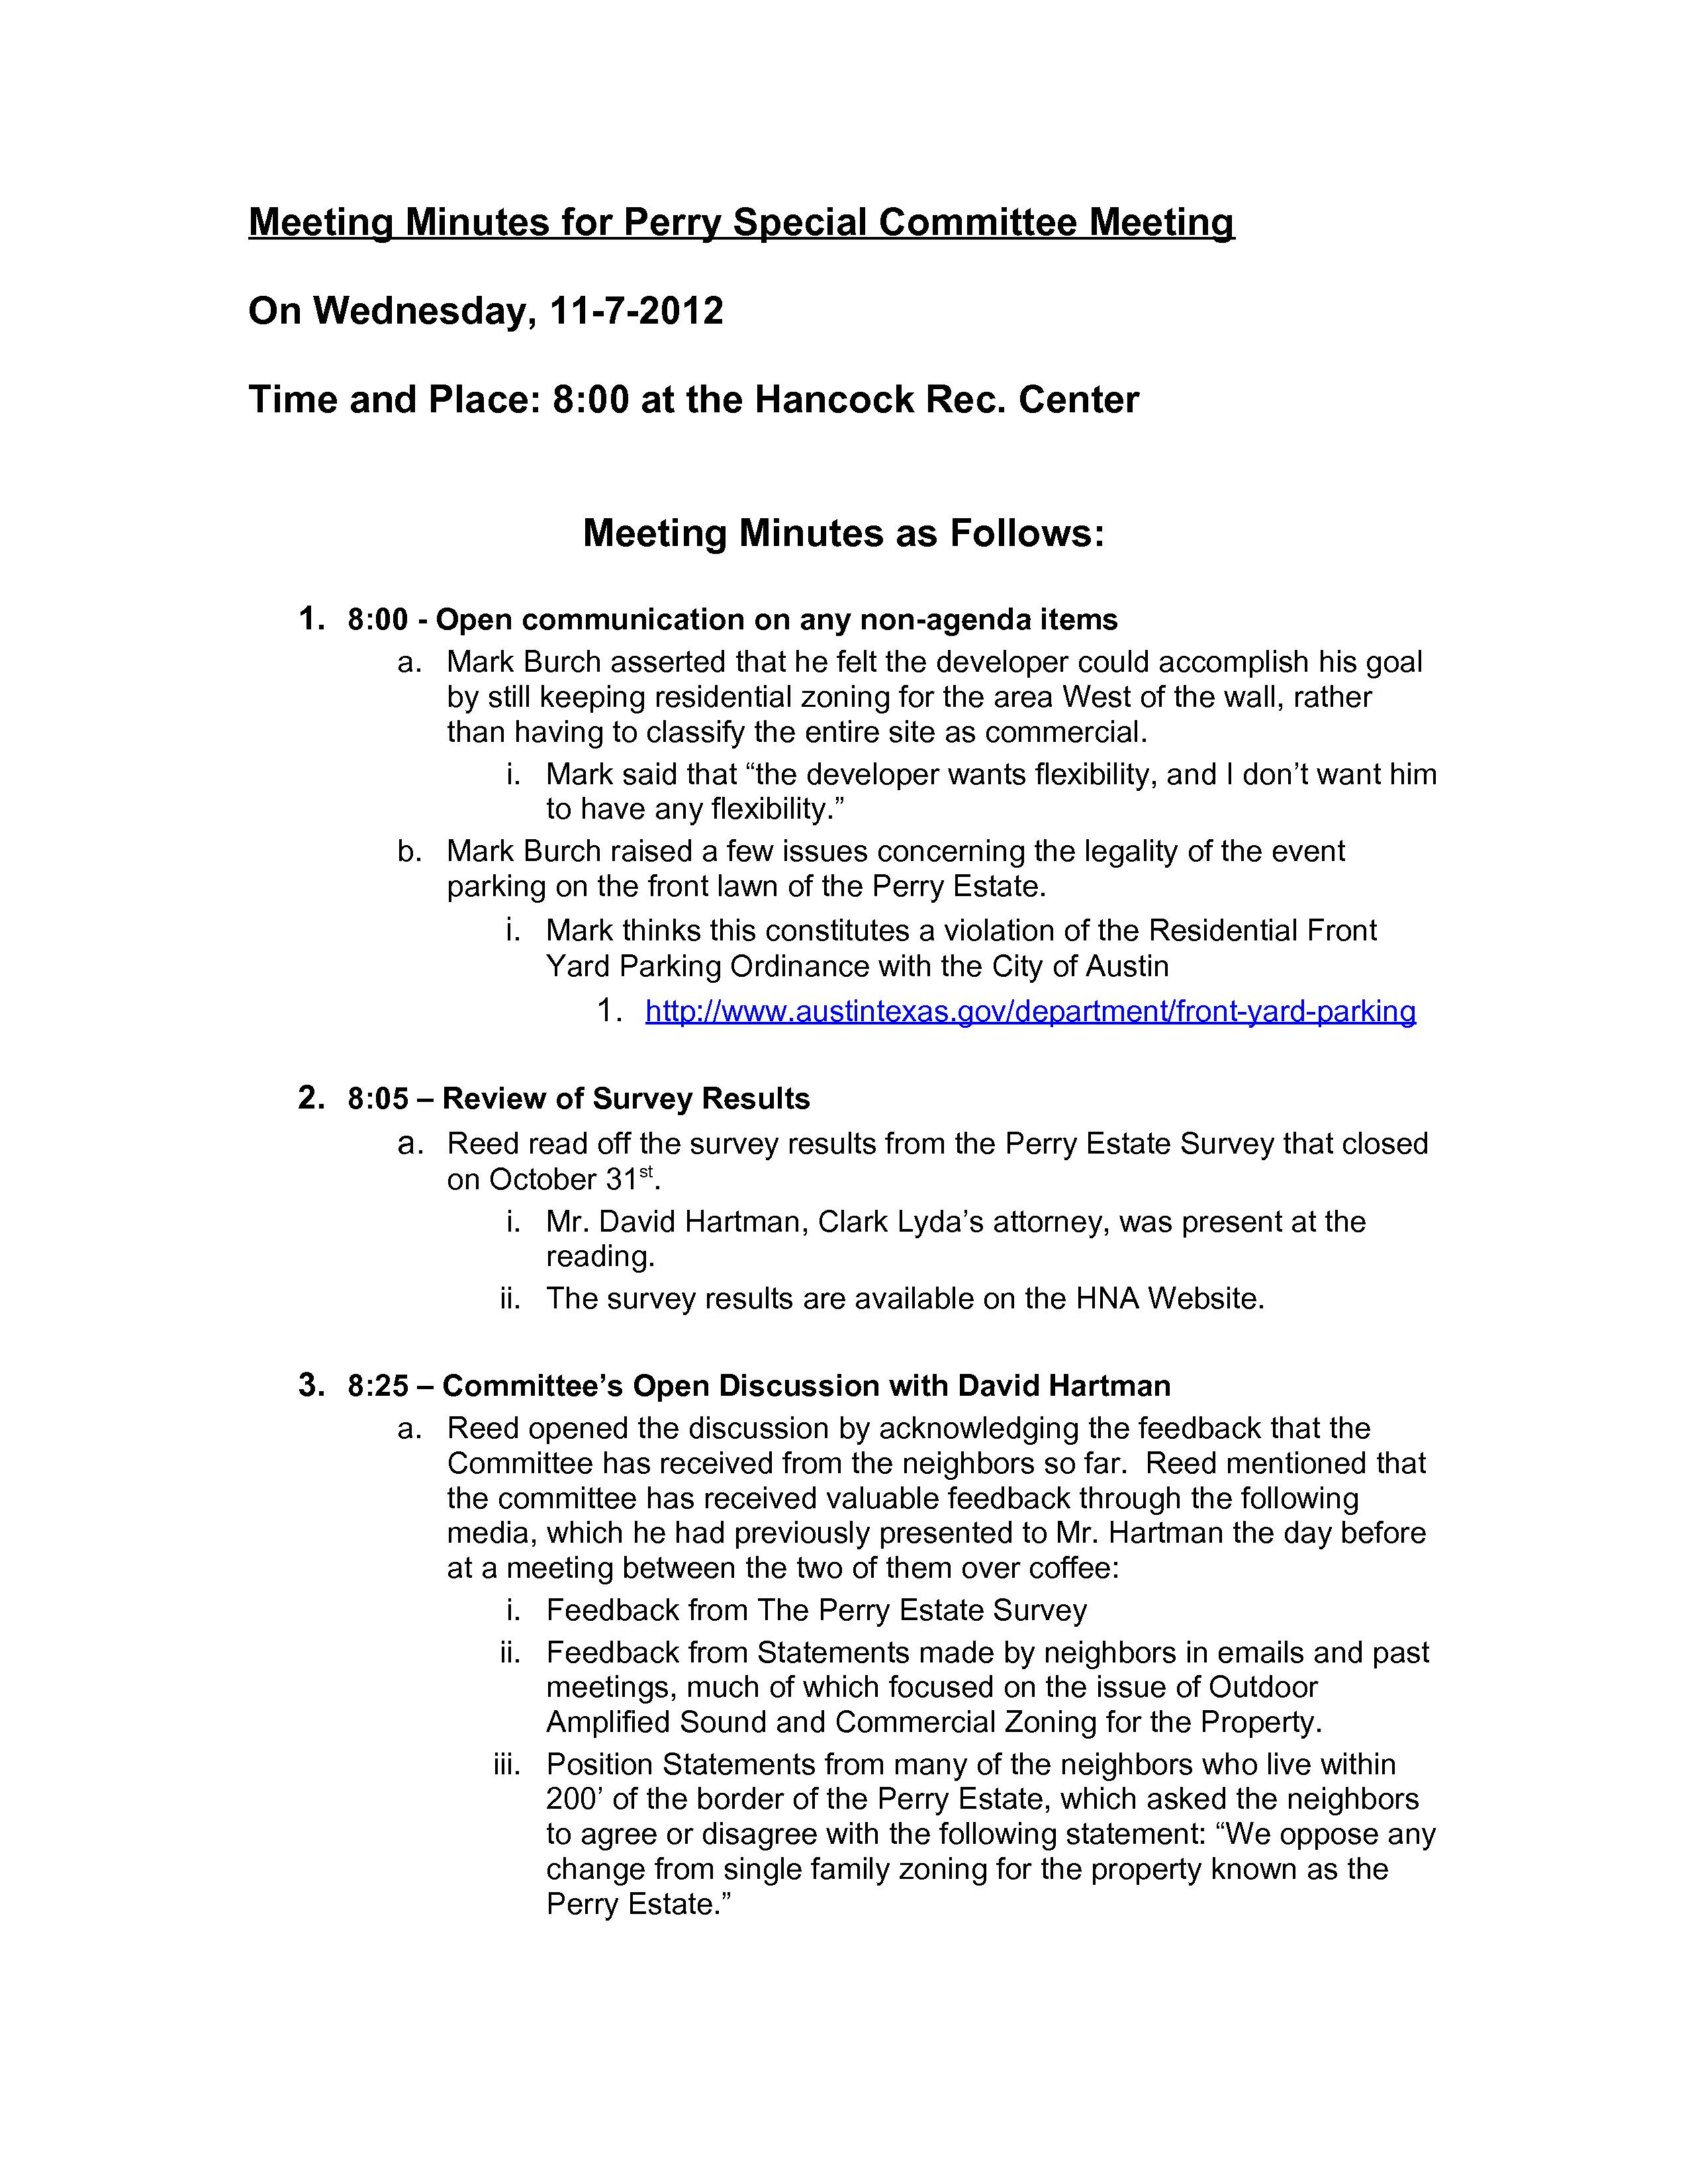 Meeting Minutes for Perry Special Committee Meeting - 11-7-2012  